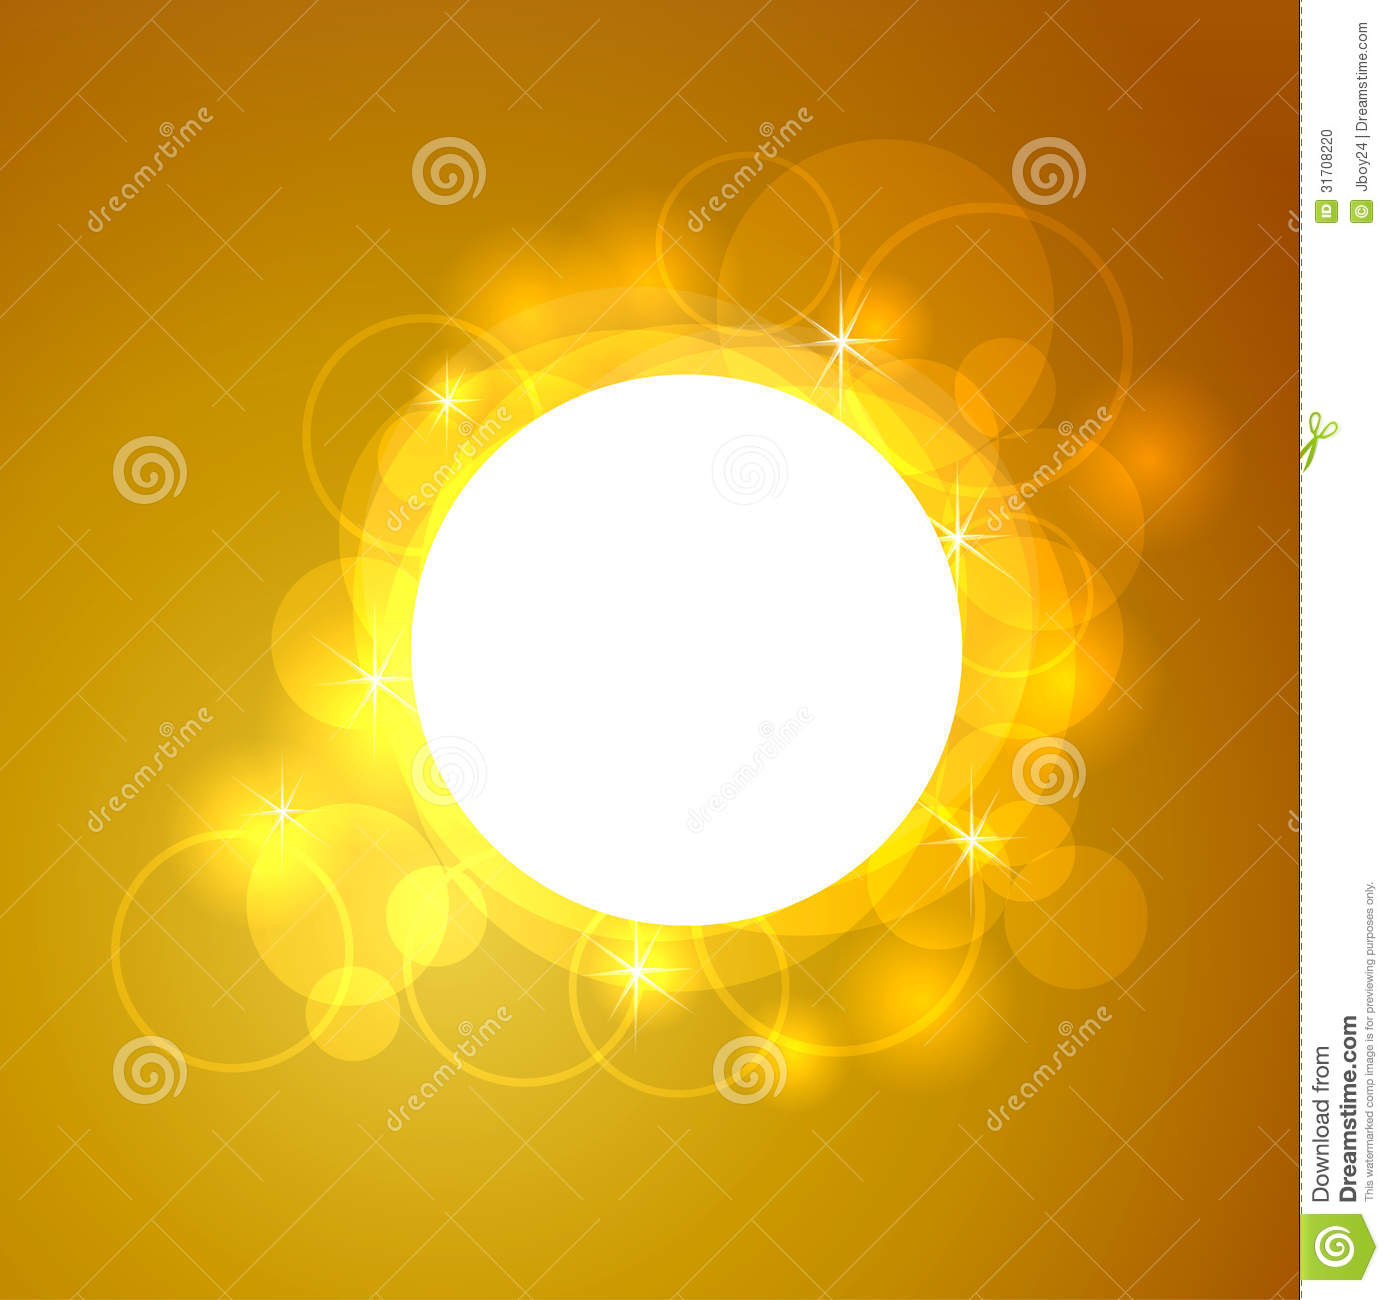 Sparkling Clean Stock Photo   Image  31708220